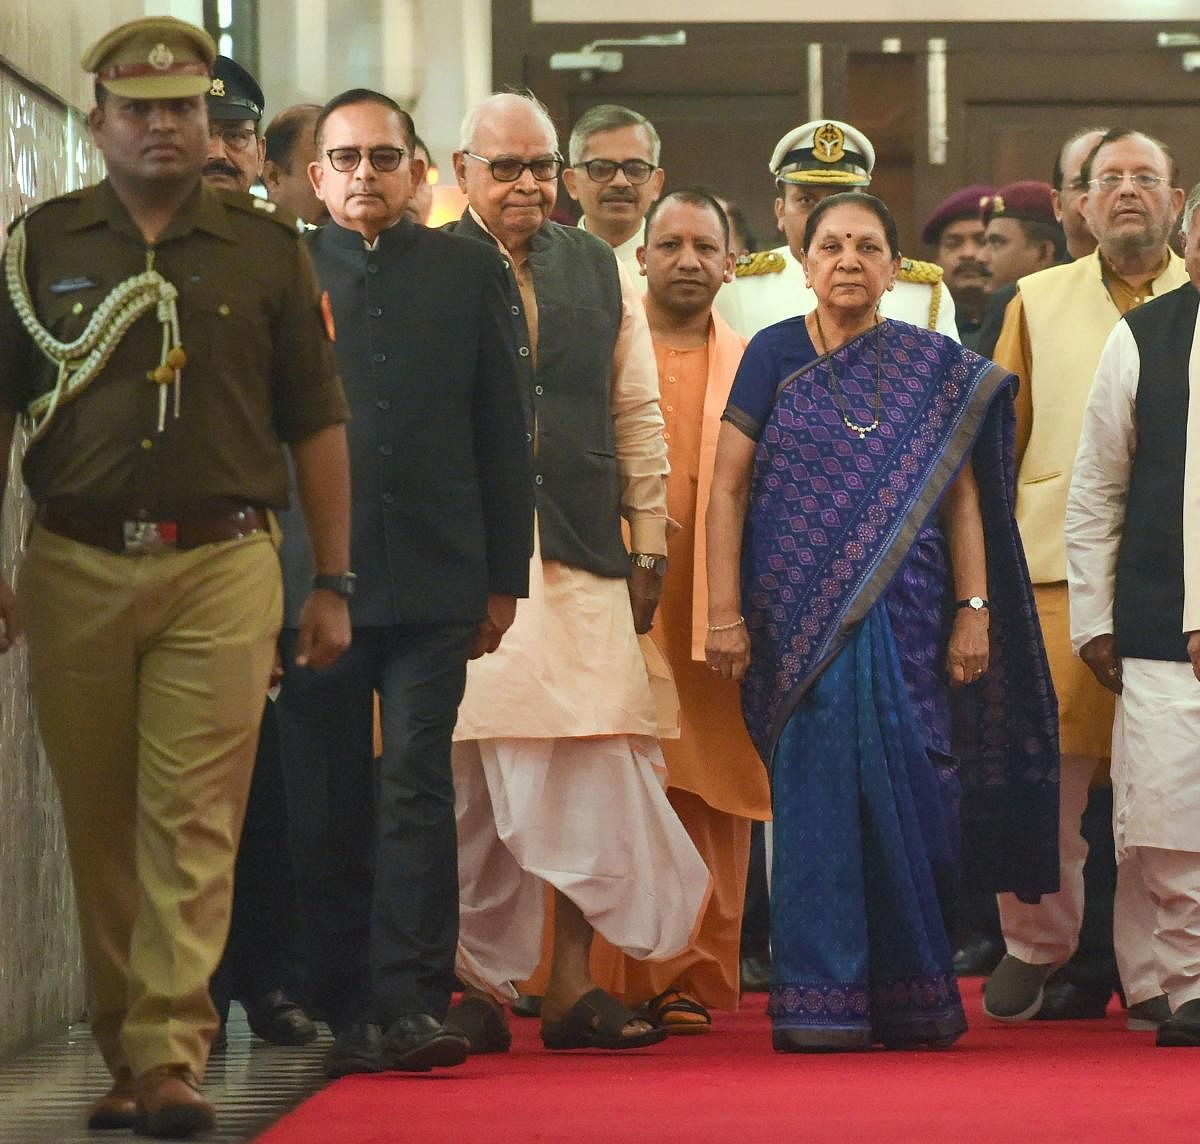 The governor referred to the successful holding of major events such as the 'Kumbh Mela' and 'Dev Deepavali' by the UP government and thanked the people of the state for their cooperation. Photo/PTI